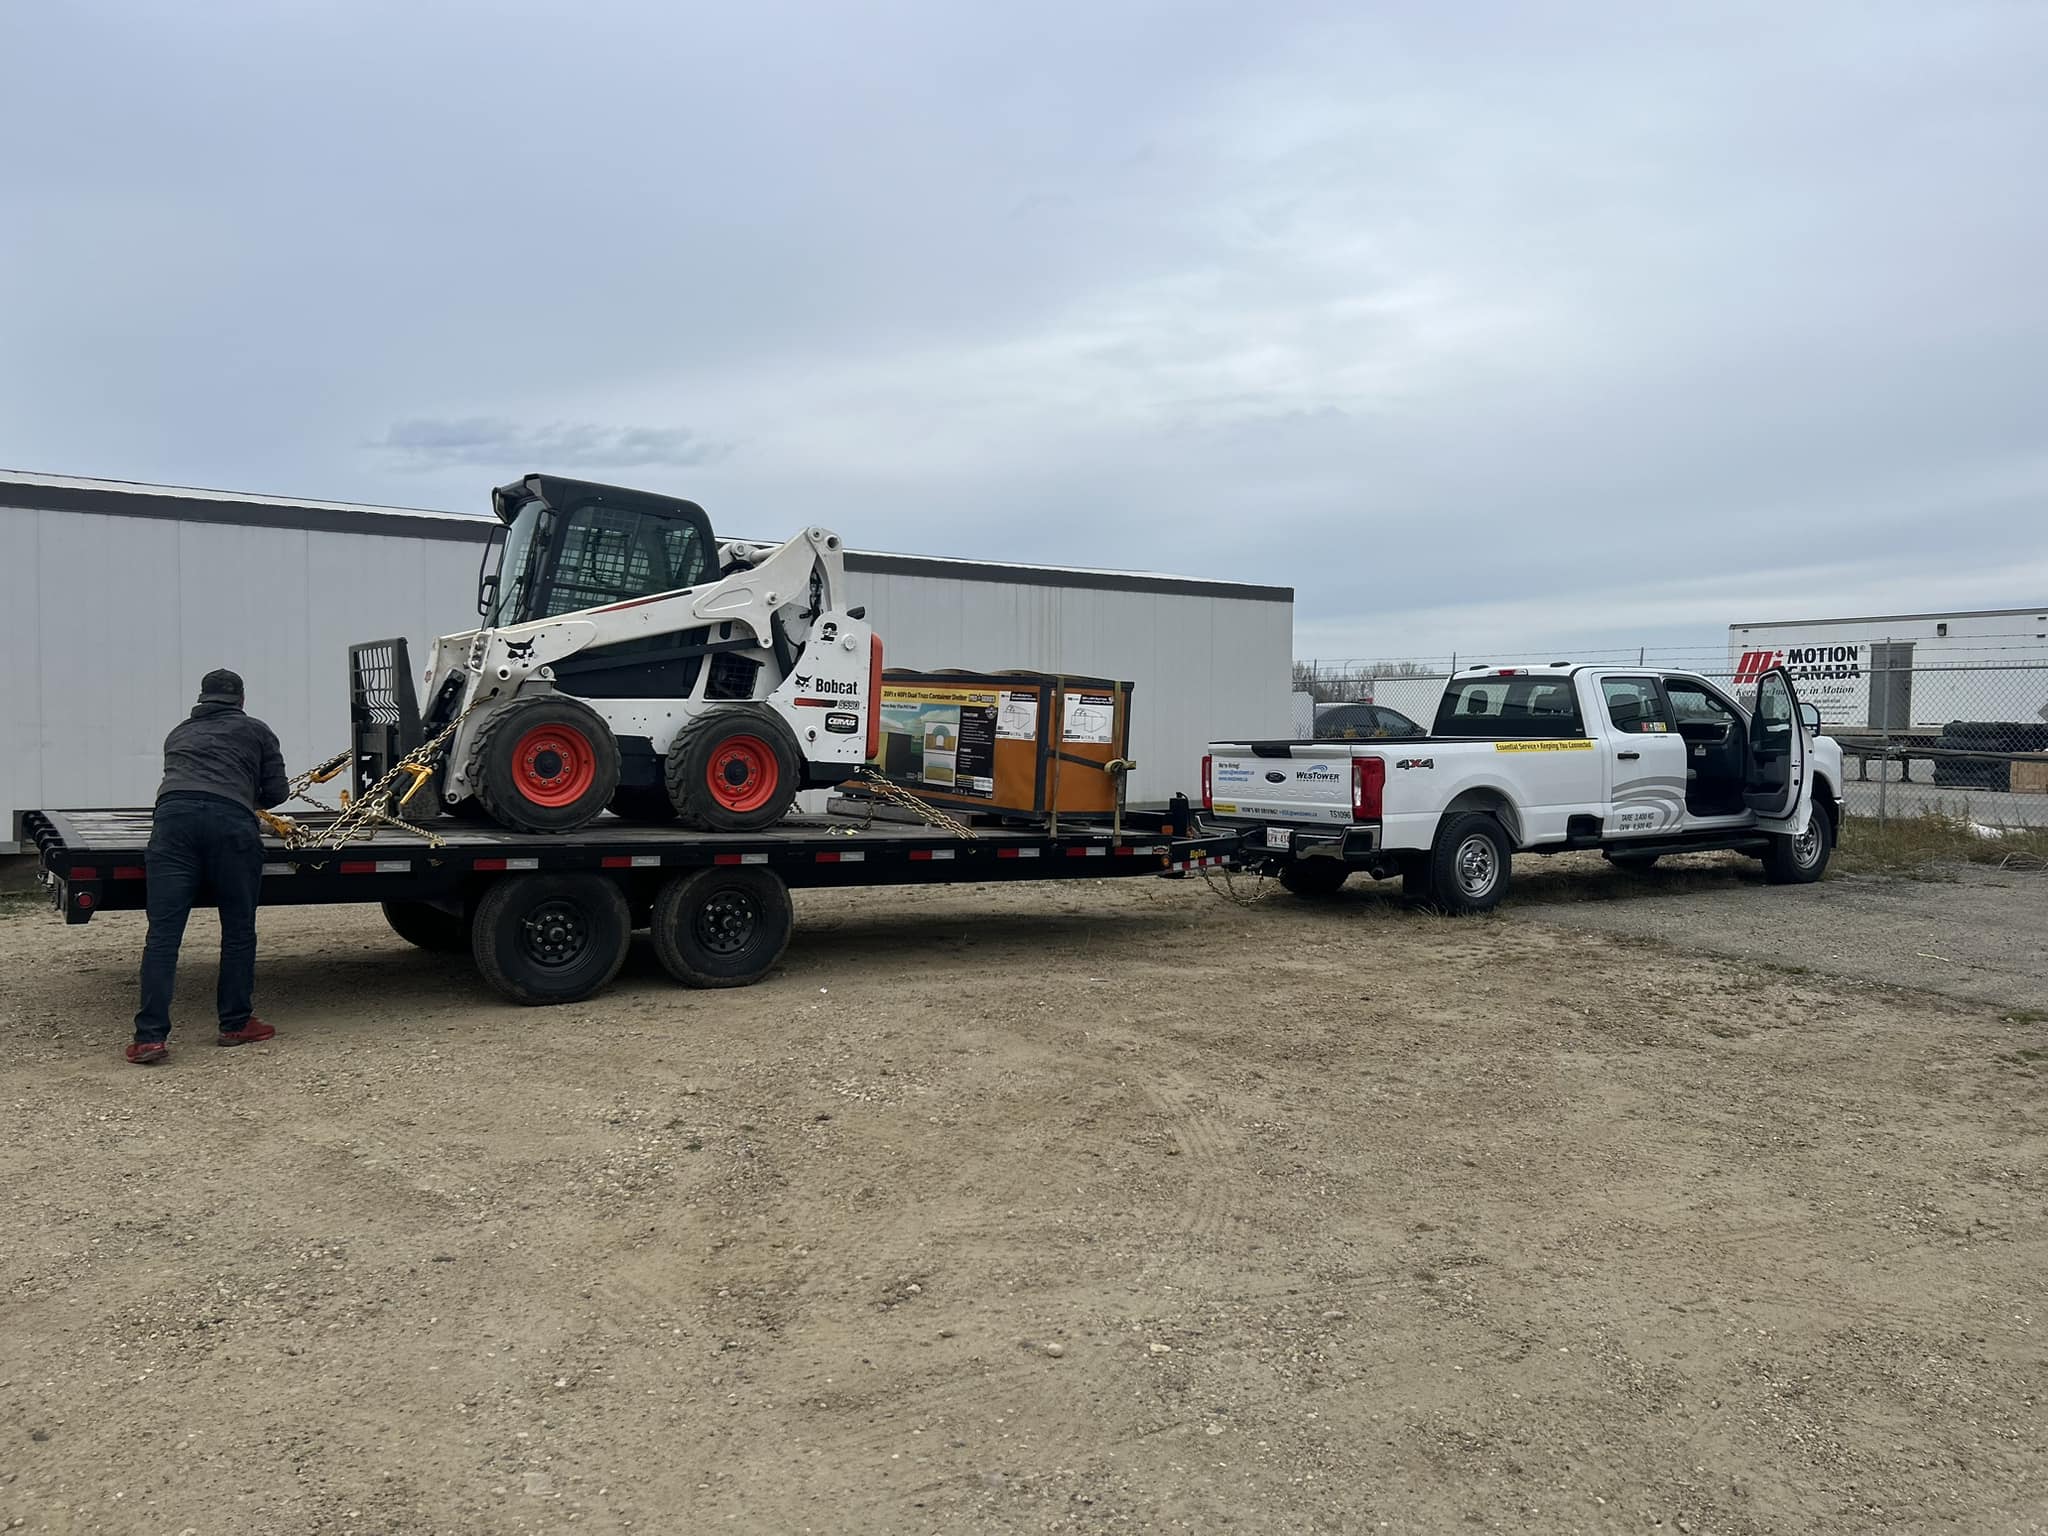 LONE WOLF MECHANICAL 4813 50 Ave, Thorsby Alberta T0C 2P0